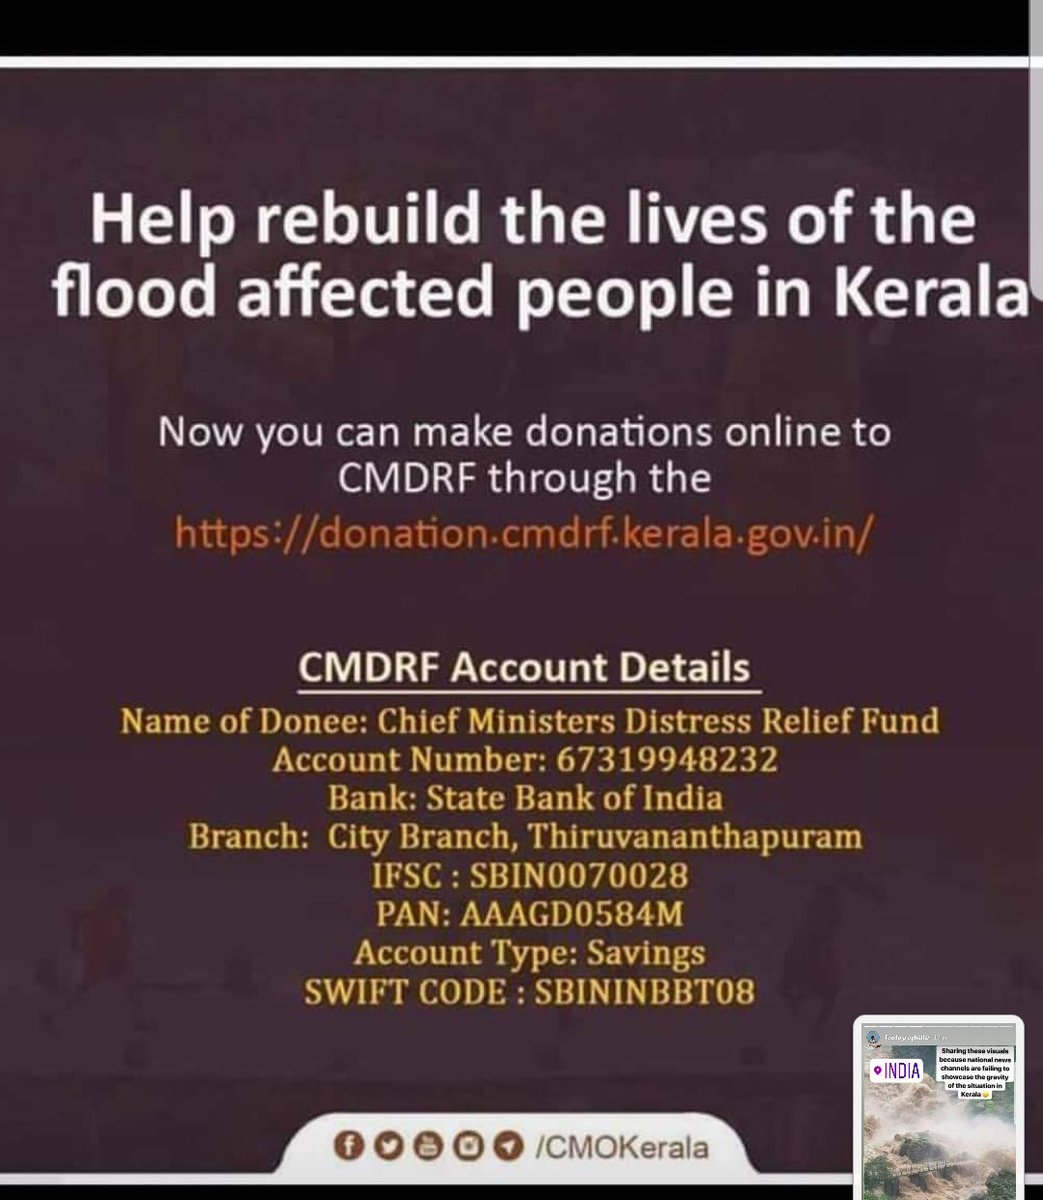 Please help in any way you can...no amount is too small